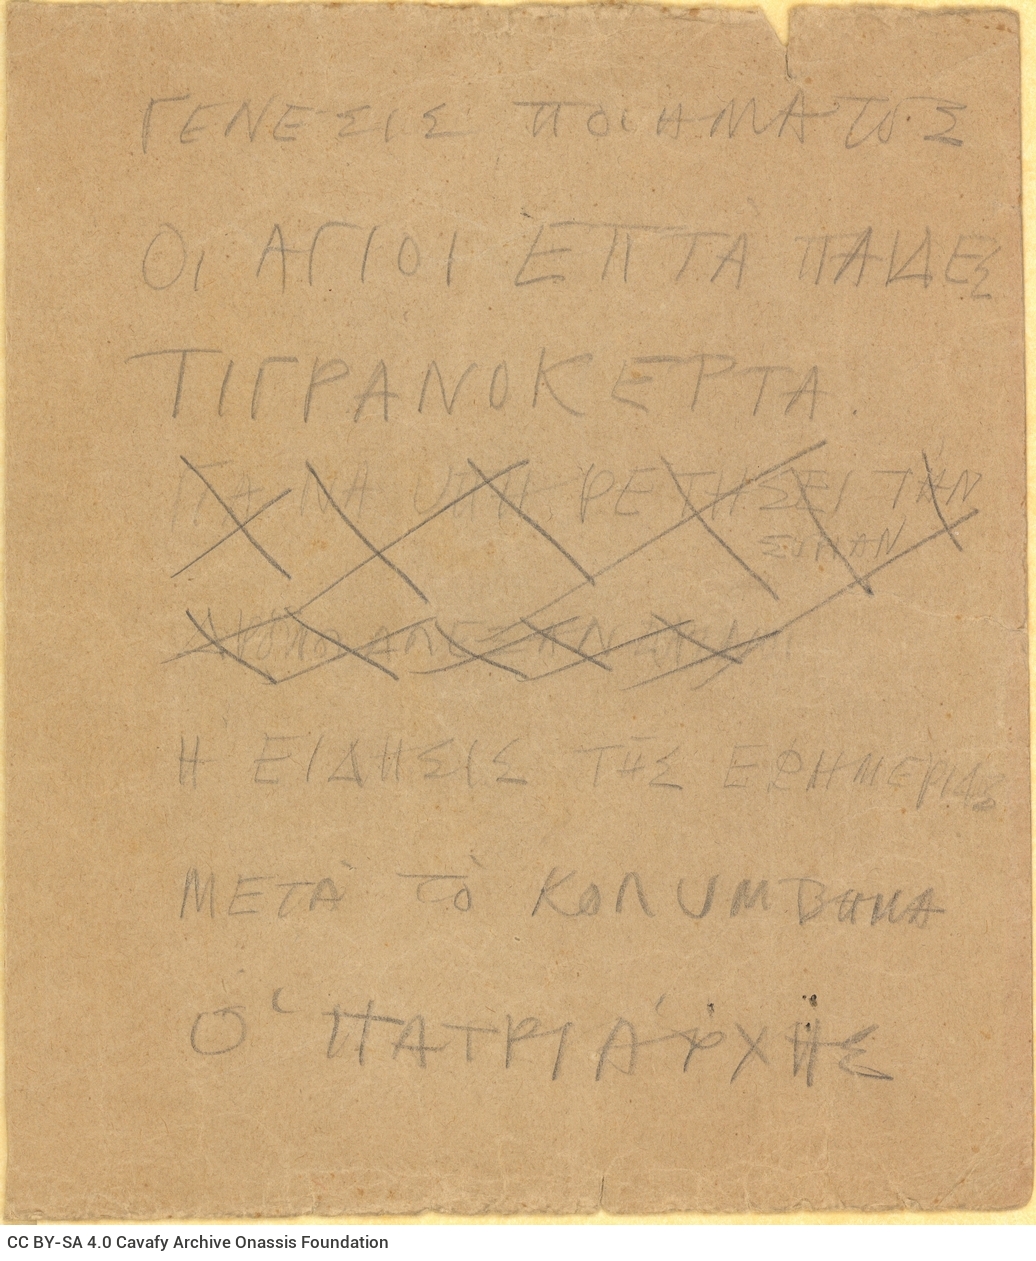 Handwritten list of poems written on three rectangular pieces of paperboard, folded in half and placed one inside the othe